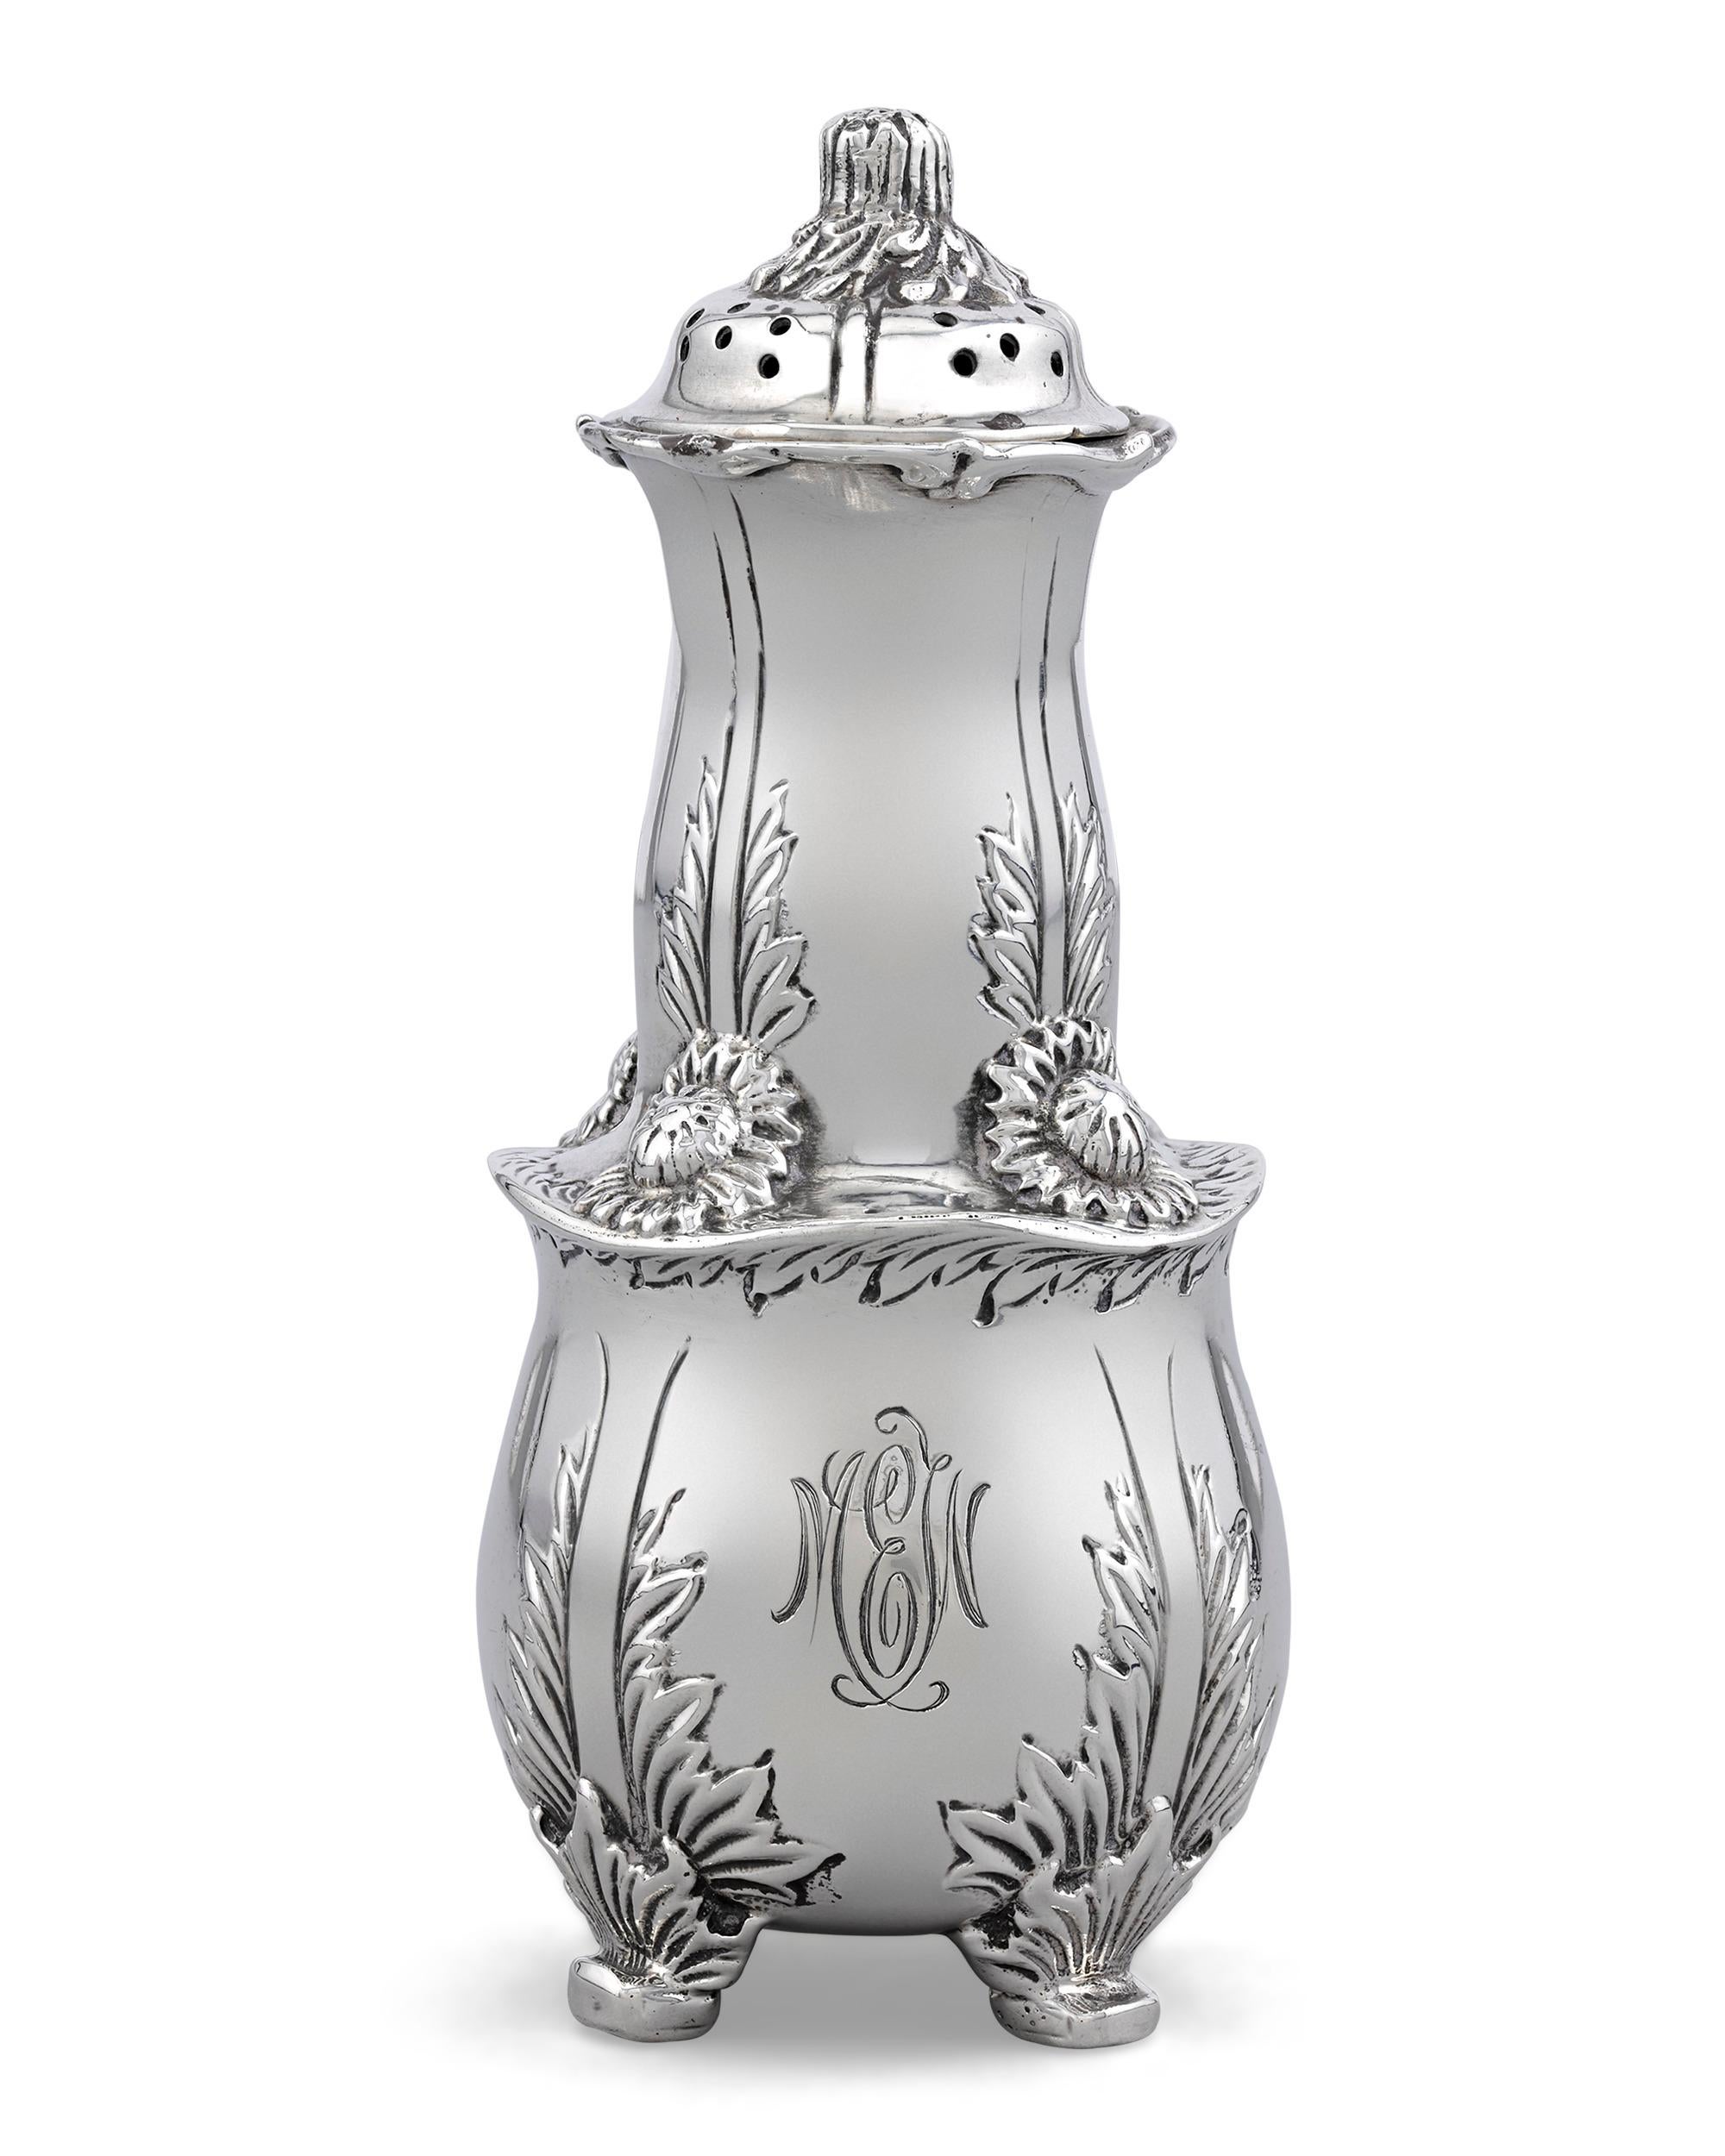 This fine set of four Tiffany & Co. sterling silver salt and pepper shakers feature the coveted Chrysanthemum pattern. Introduced in 1878 and patented in 1880 (patent no. 11968), Chrysanthemum was the work of Charles T. Grosjean, one of the most